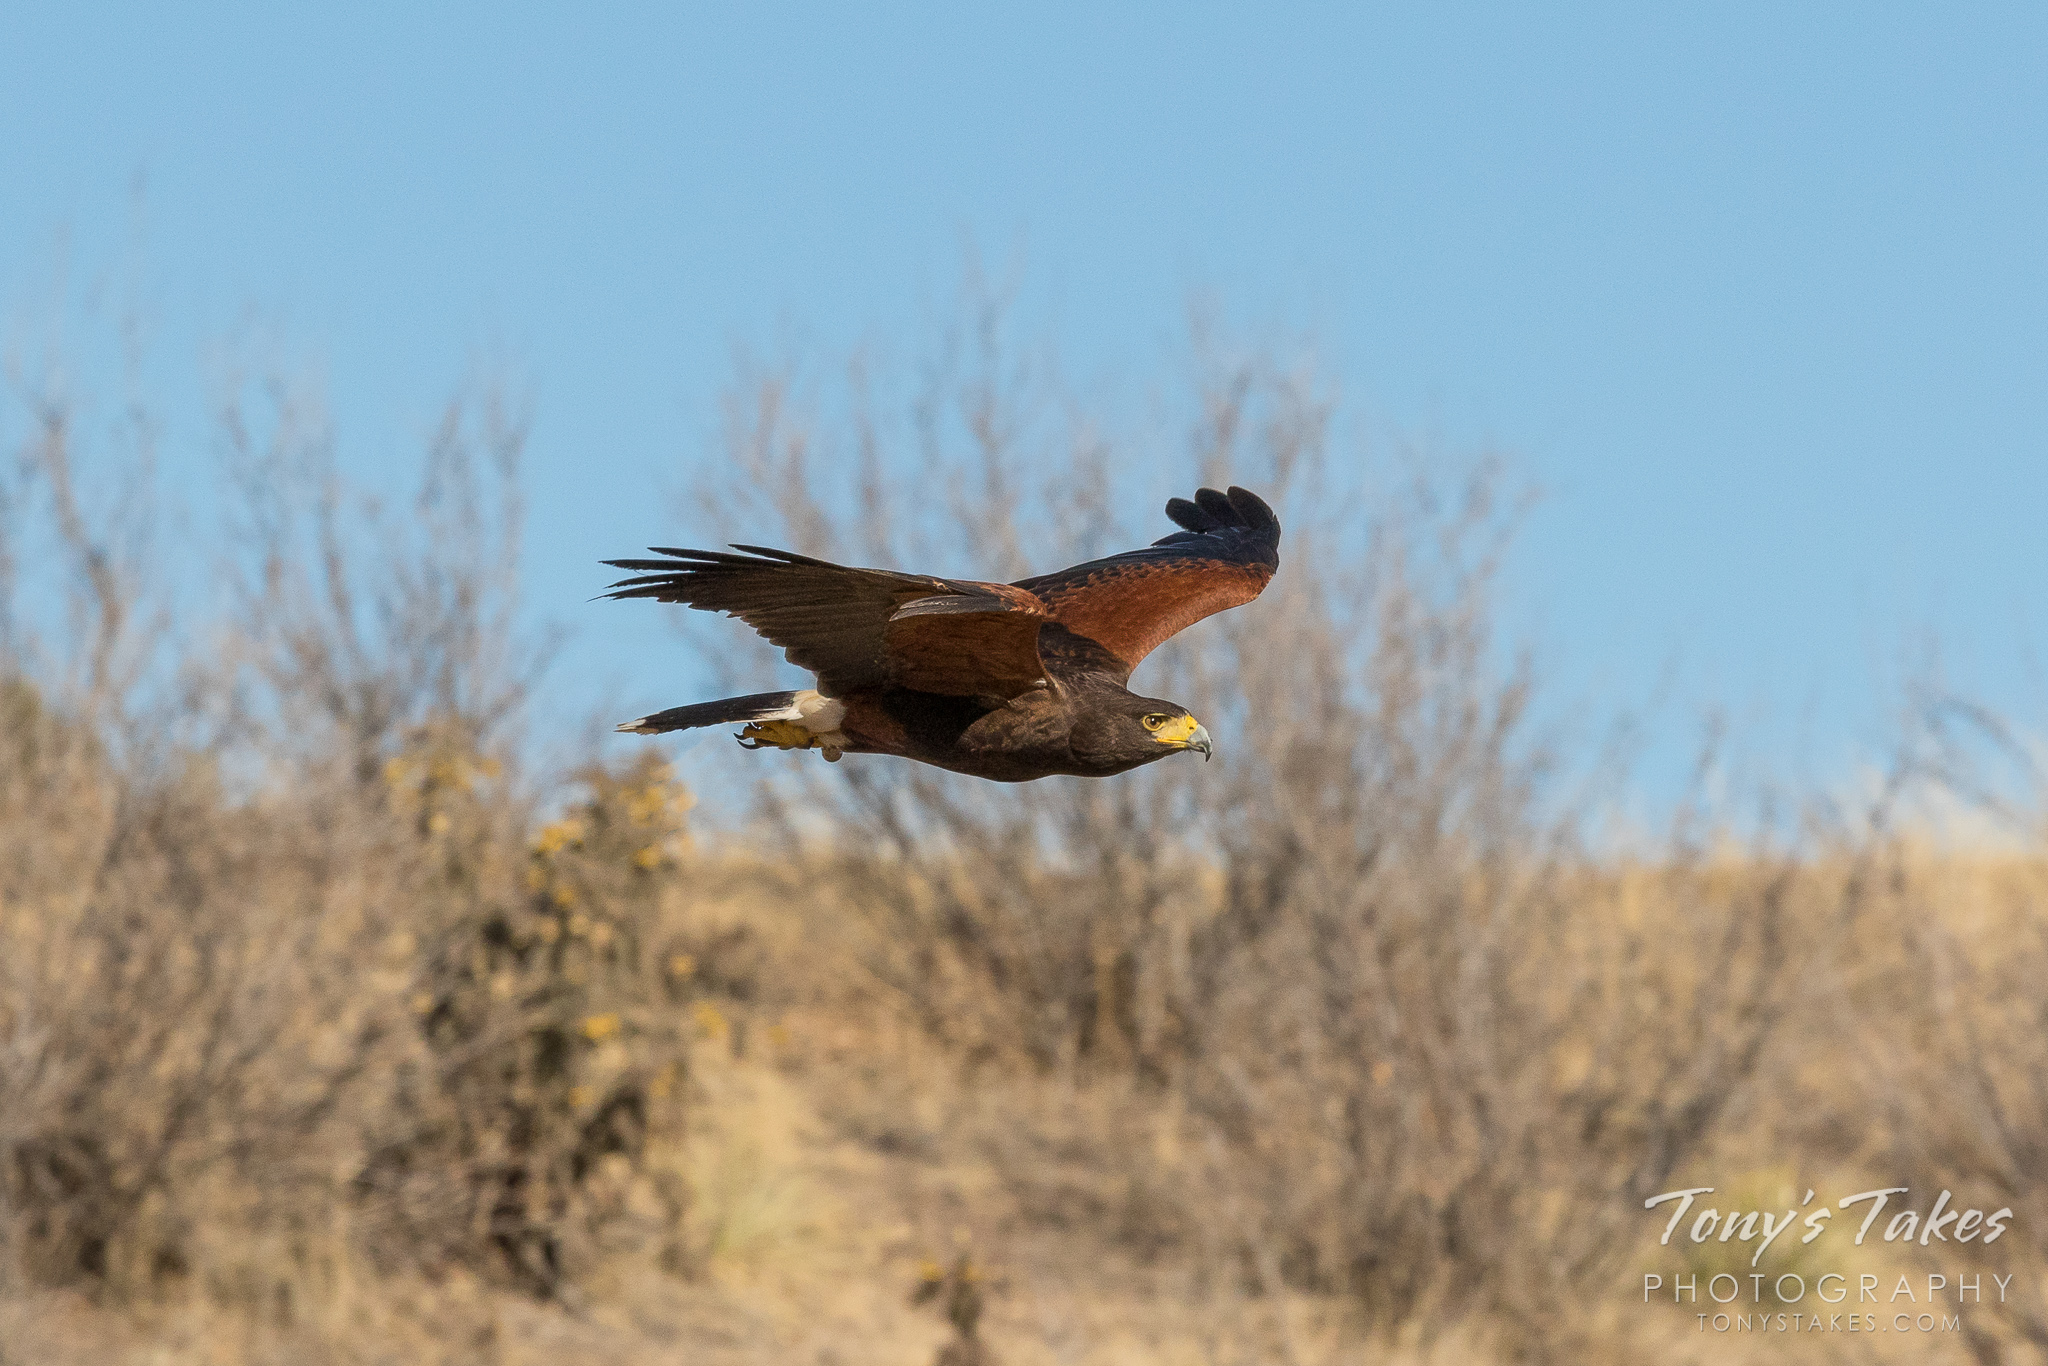 A Harris's Hawk in flight during a private photoshoot event. © Tony’s Takes